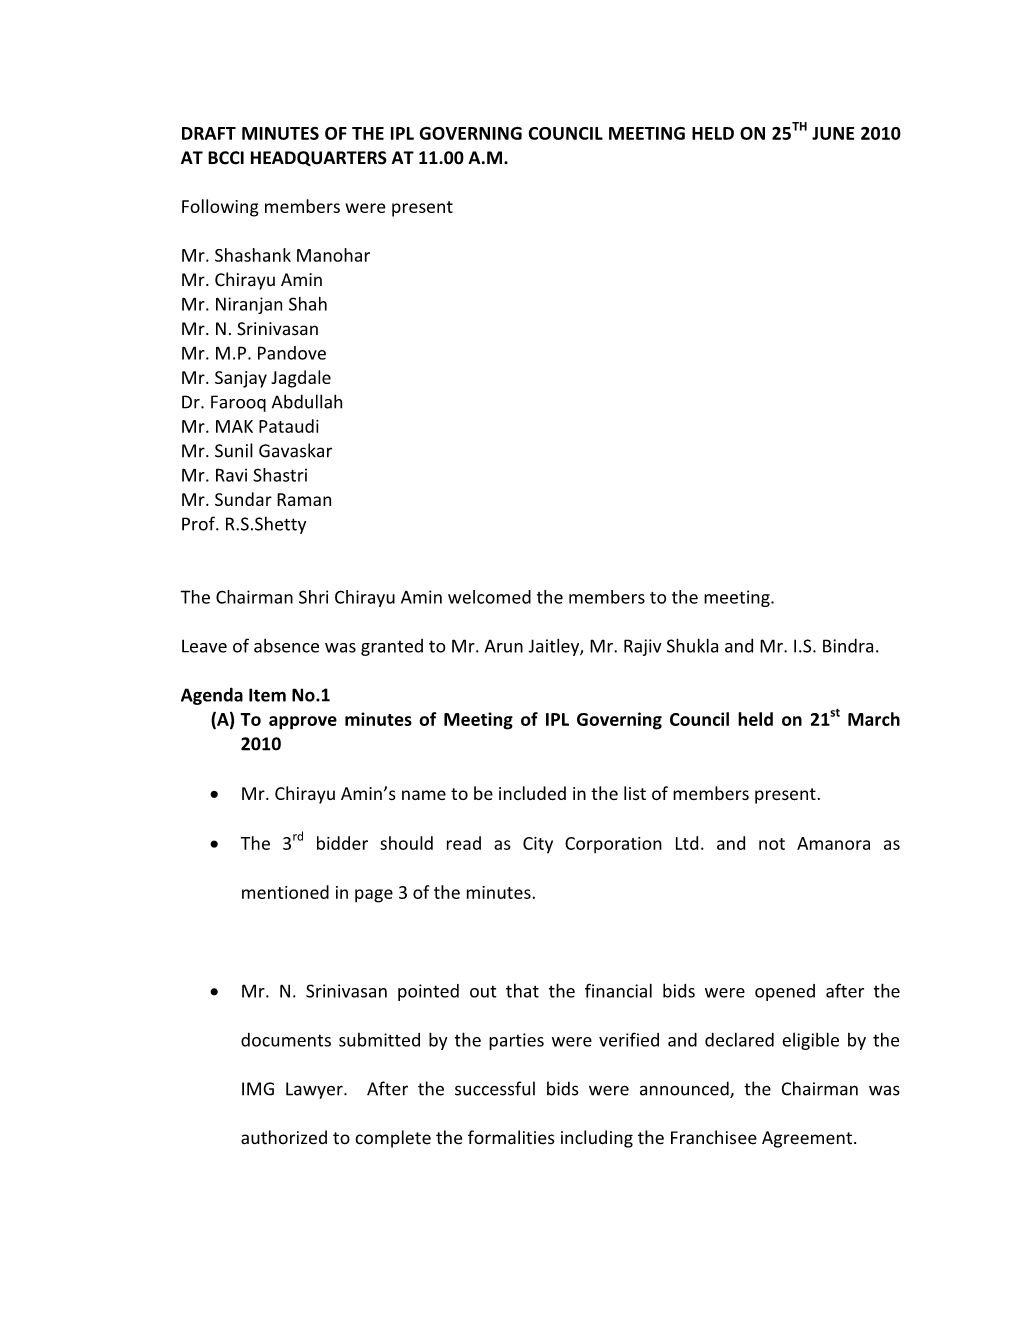 Draft Minutes of the Ipl Governing Council Meeting Held on 25Th June 2010 at Bcci Headquarters at 11.00 A.M